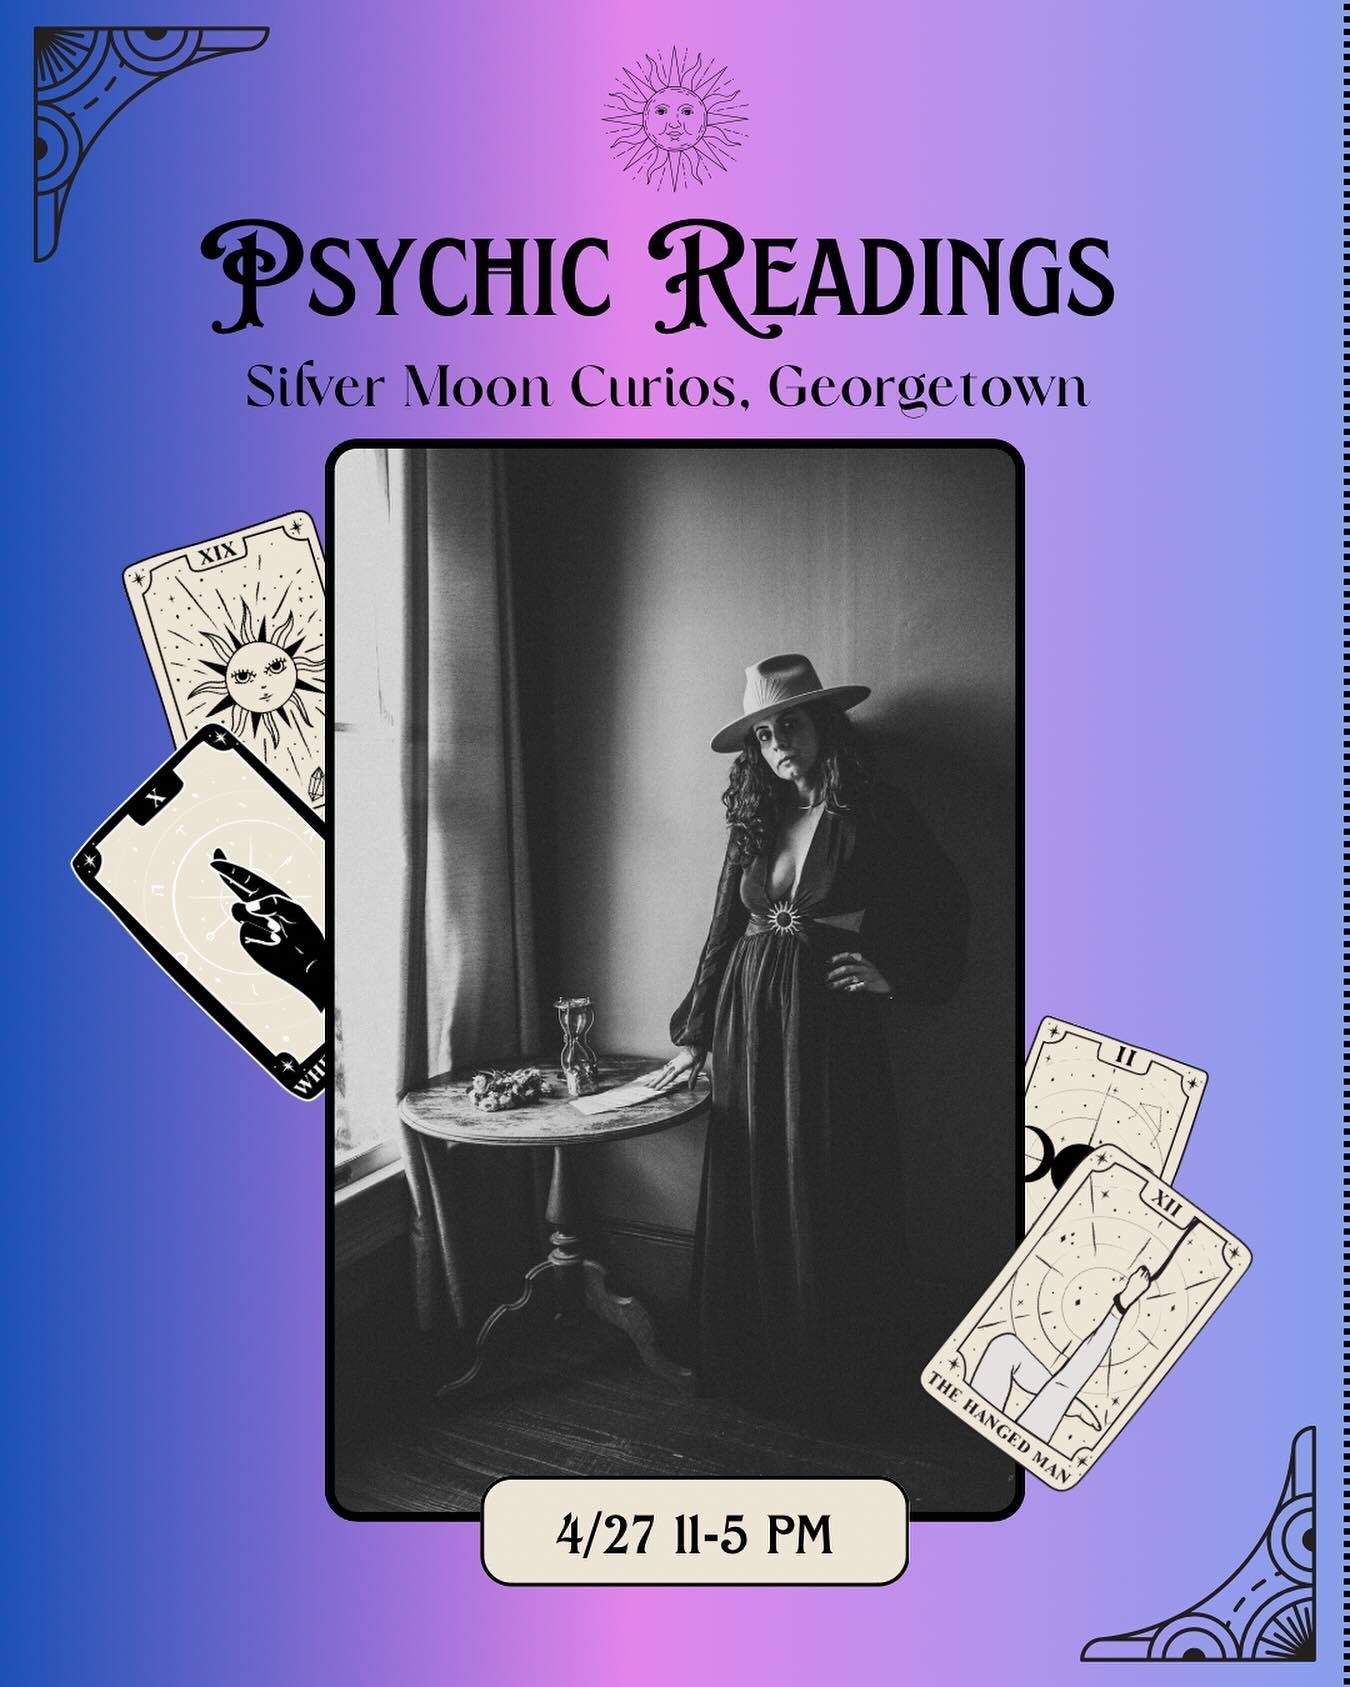 My cosmic love and desire for all things mystical is @silvermooncurios 🔮 Join us this Saturday in Georgetown, 4/27 from 11-5pm for Red Poppy Festival. 🥀

I will be offering Psychic Tarot readings: 
15 min tarot sessions for $33
30 min tarot session